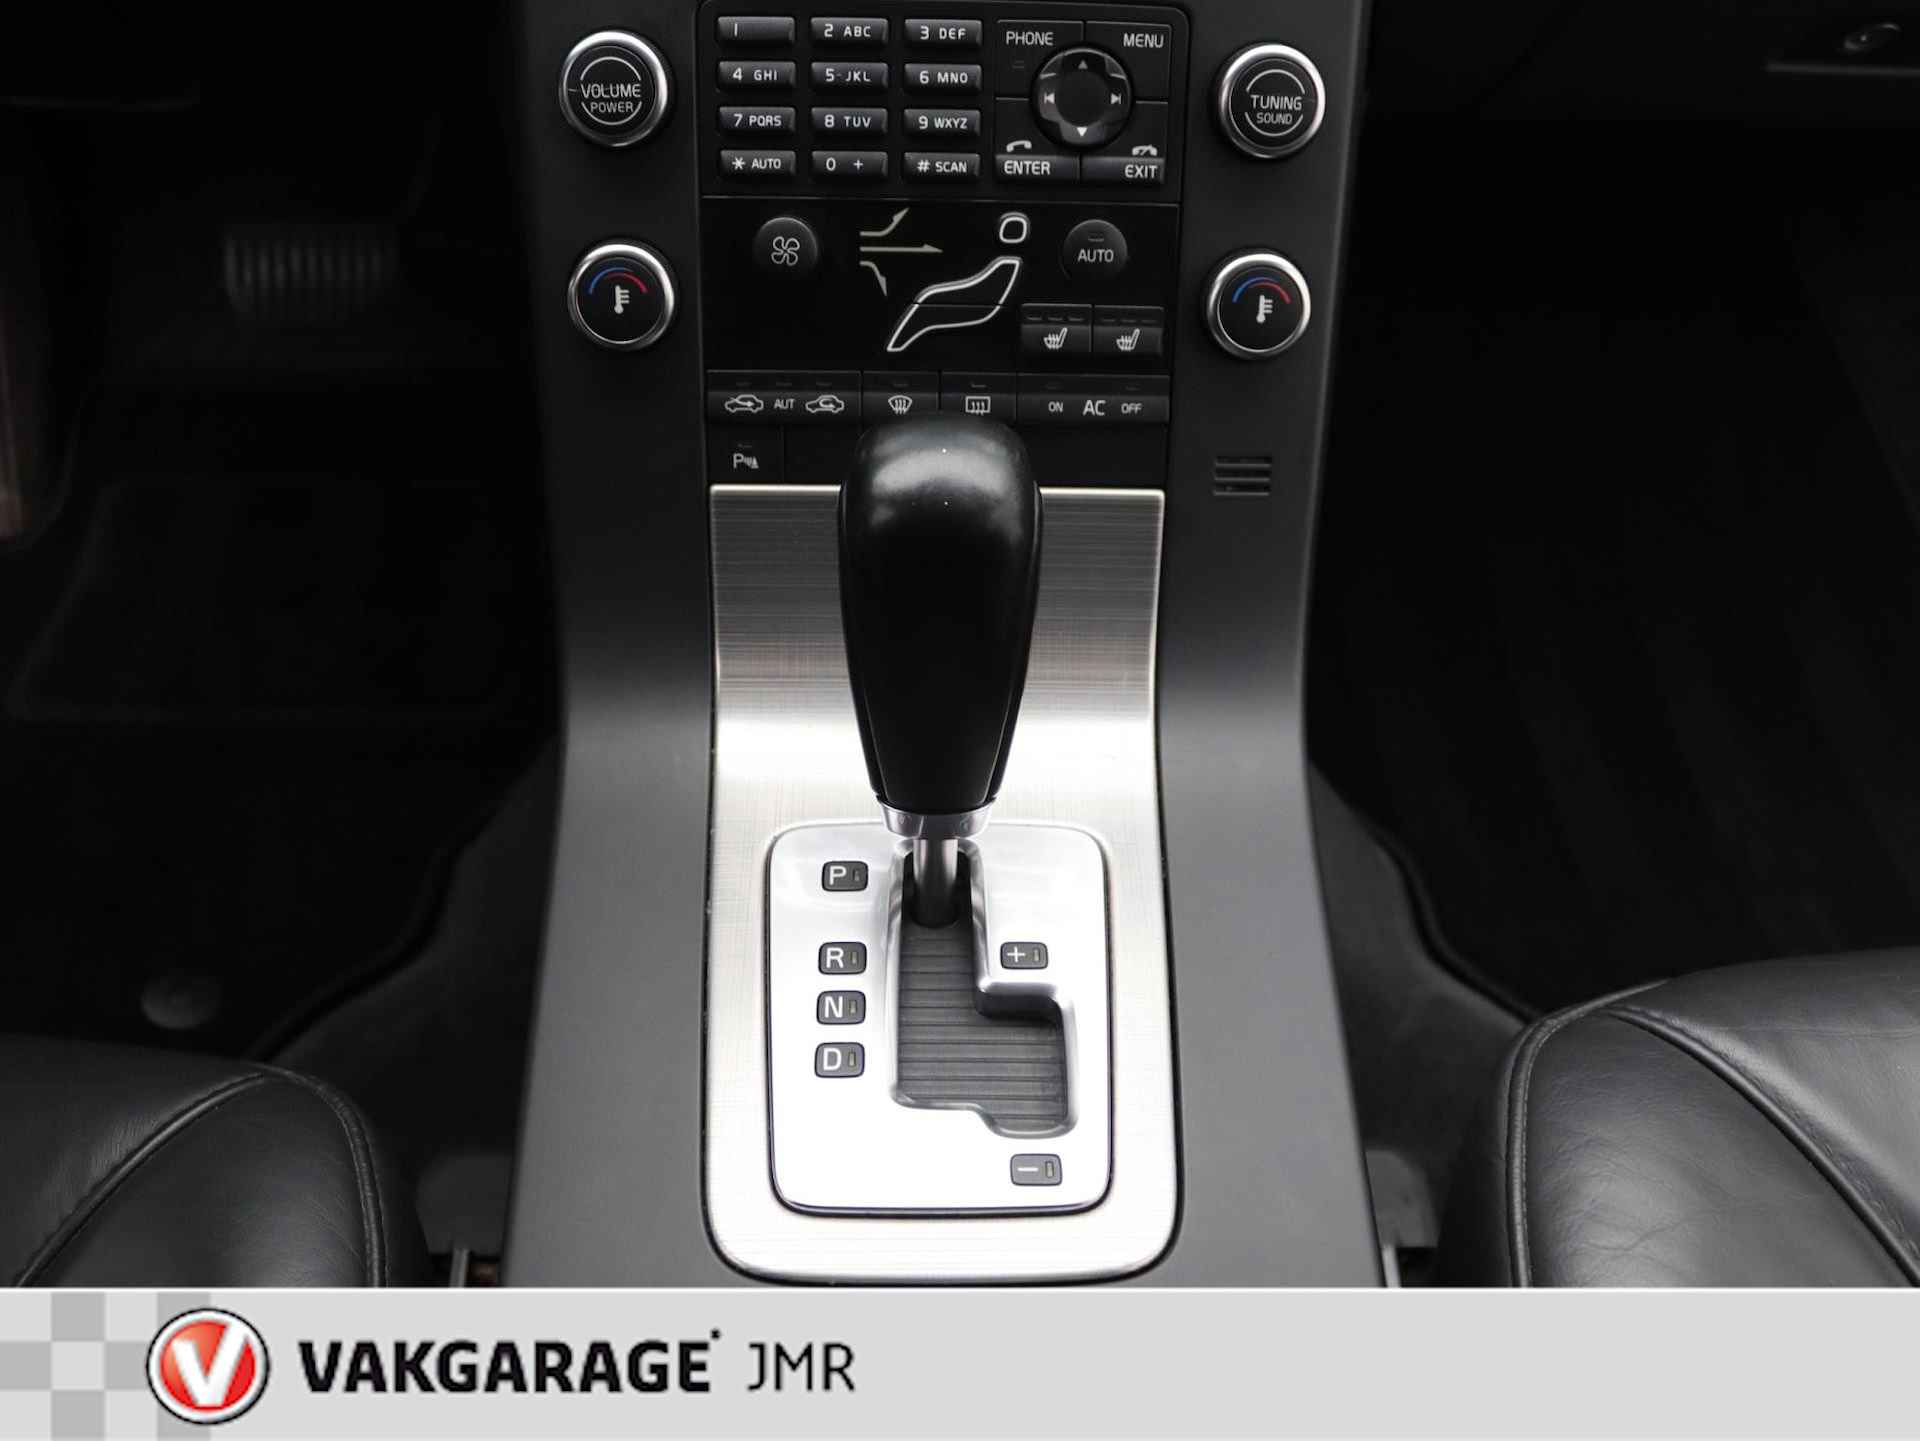 Volvo V70 2.5FT Momentum Youngtimer Trekhaak - PDC Achter - Stoel + Achterbank verwarming - Bluetooth - Climate en Cruise Control - 22/39